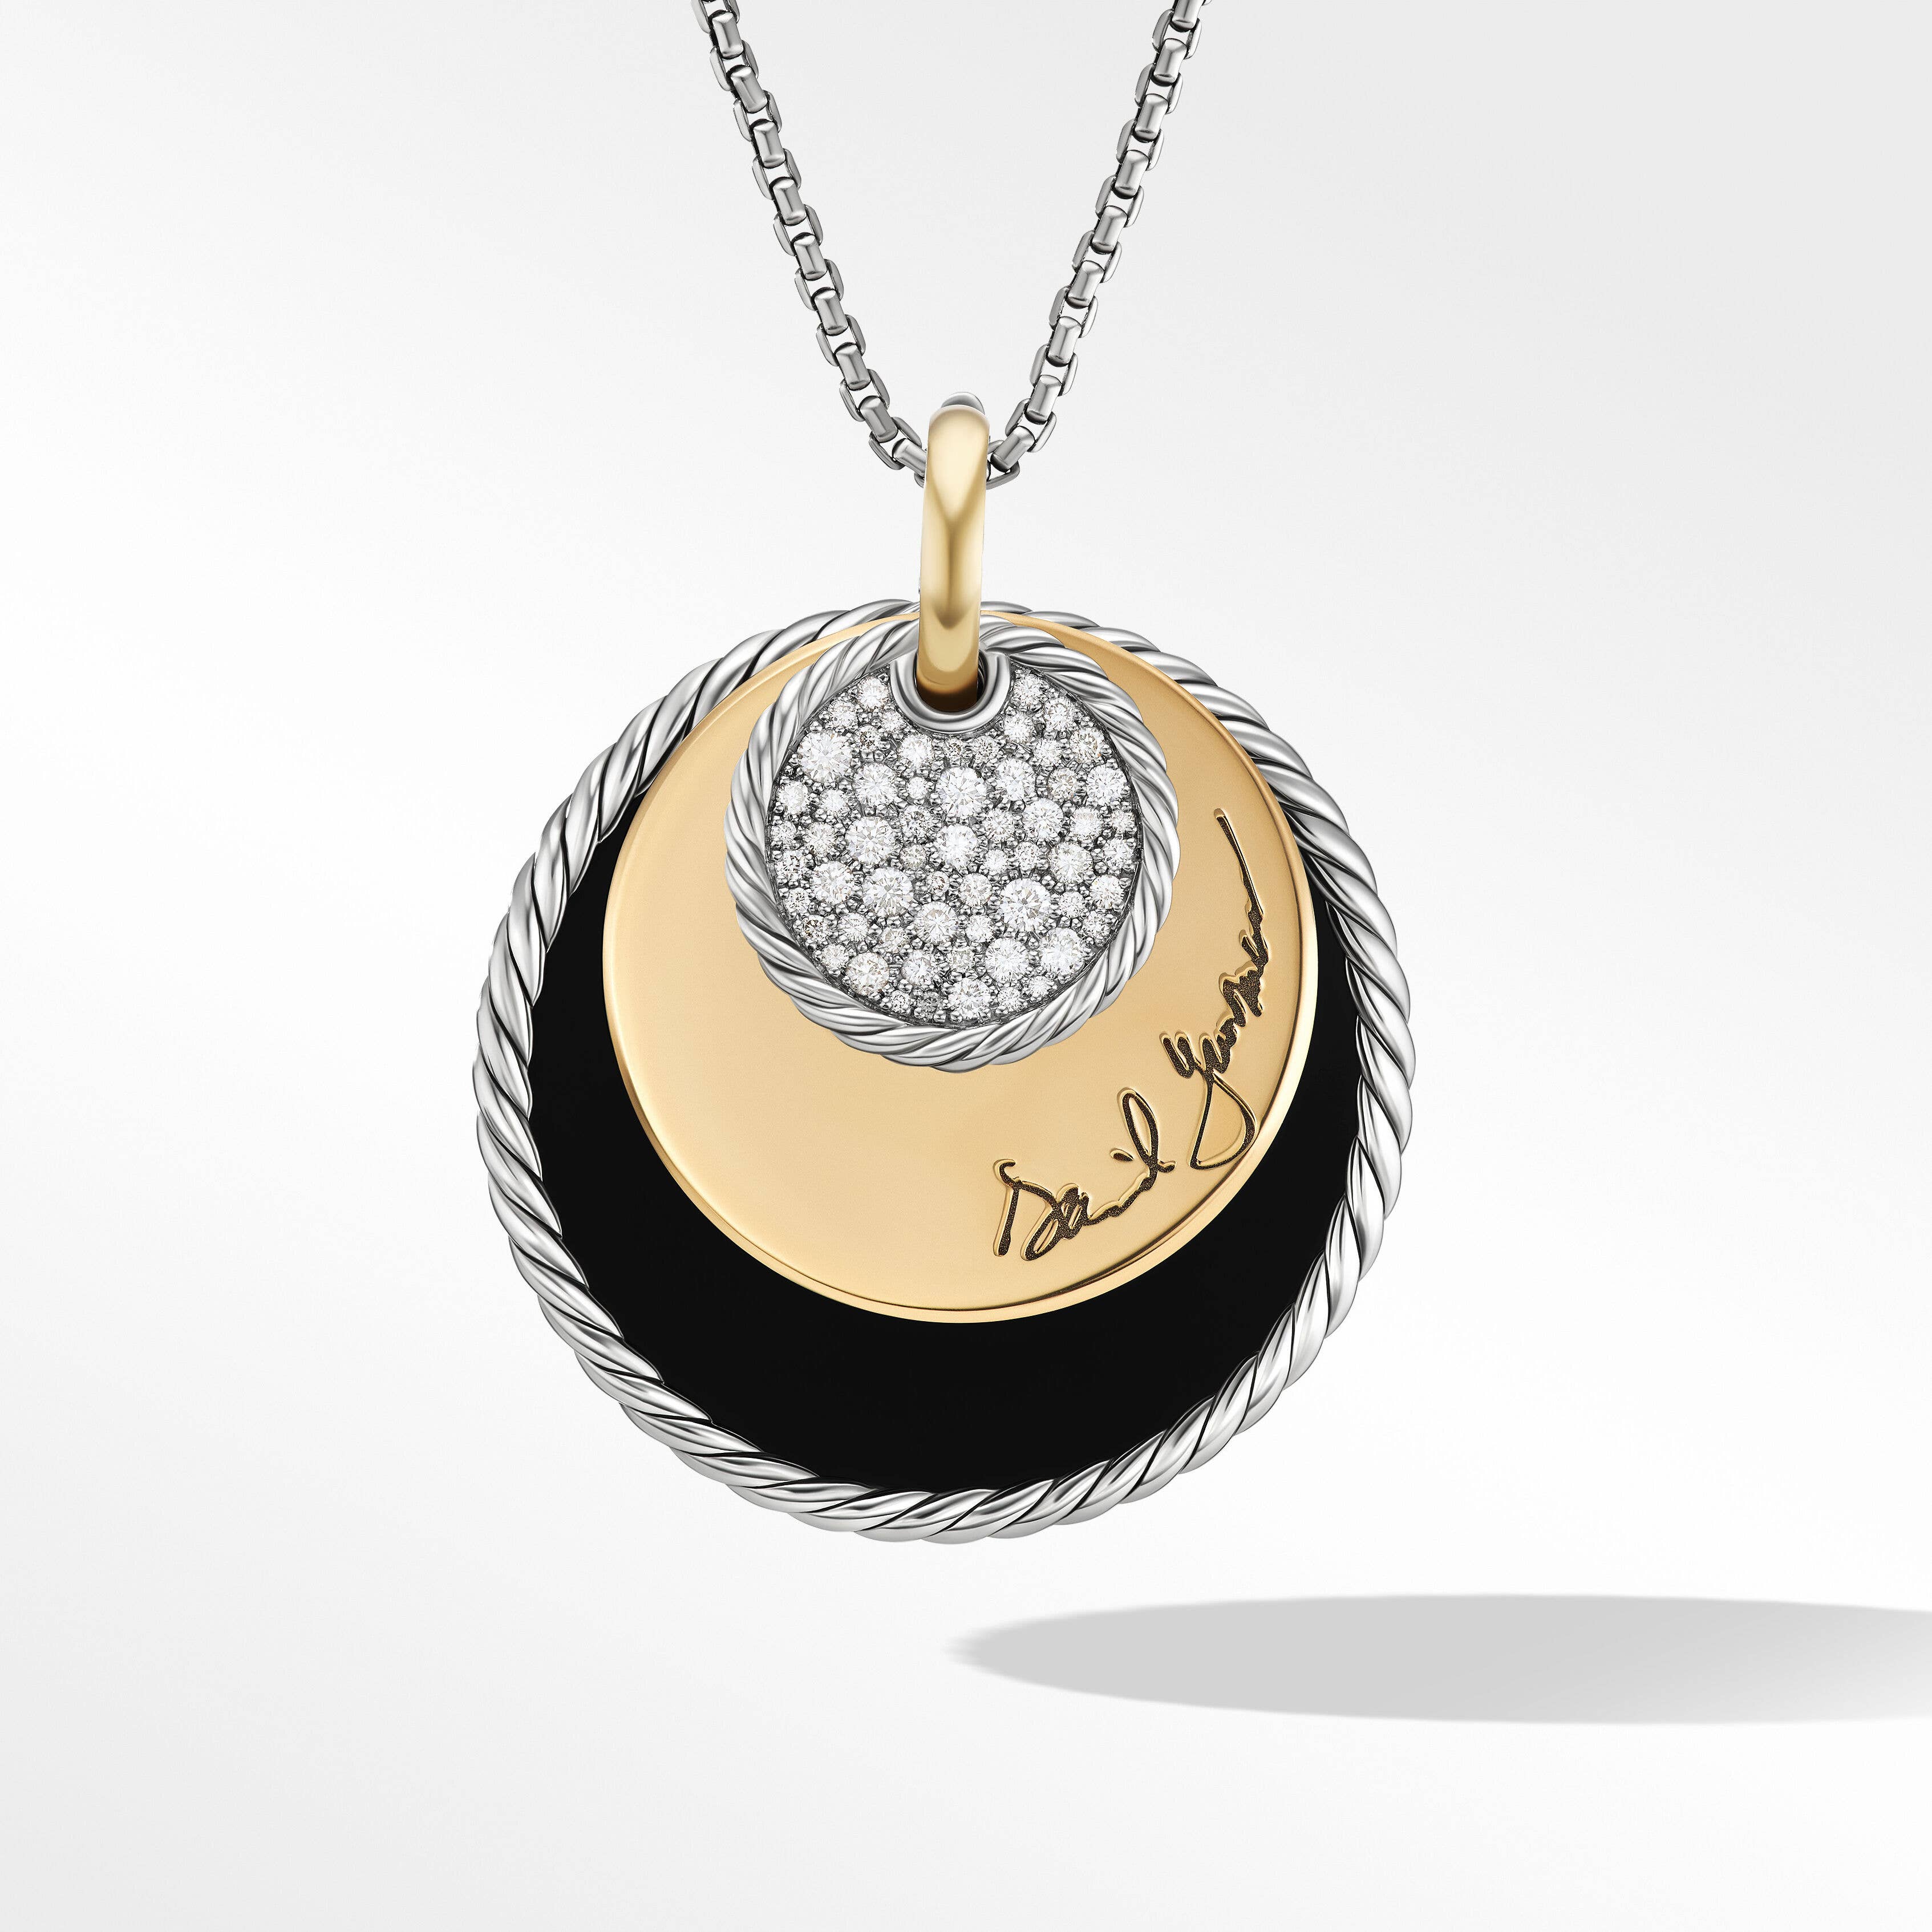 DY Elements® Eclipse Pendant Necklace in Sterling Silver with Black Onyx Reversible to Mother of Pearl, 18K Yellow Gold and Pavé Diamonds